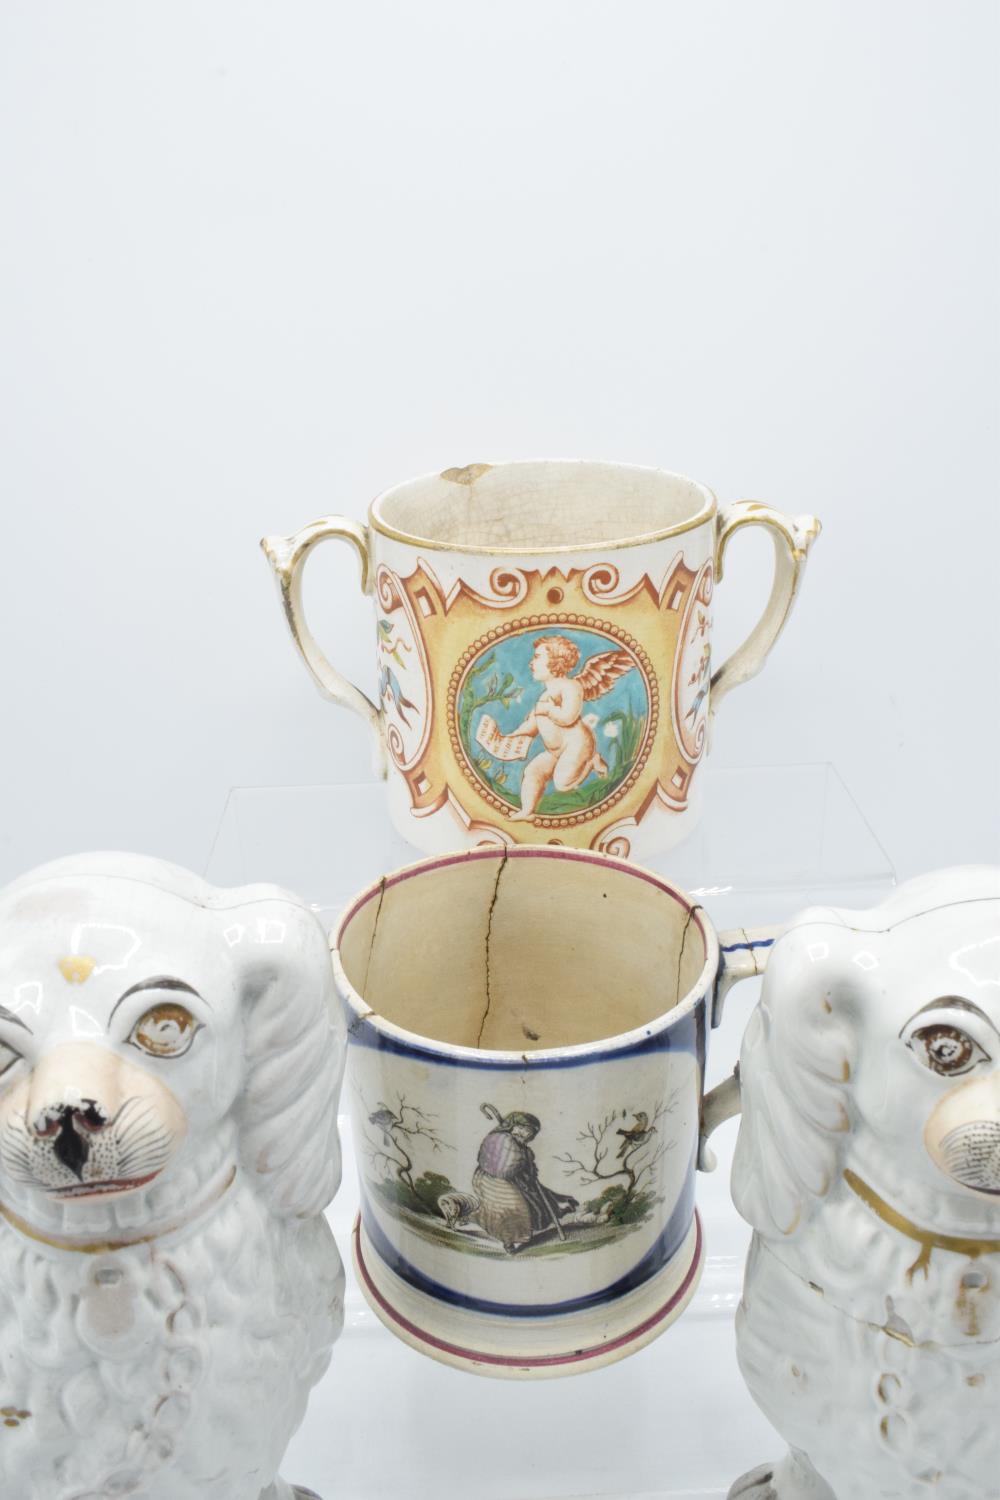 19th century Staffordshire pottery to include a pair of dogs, a shepherd mug and a 2 handled - Image 2 of 3